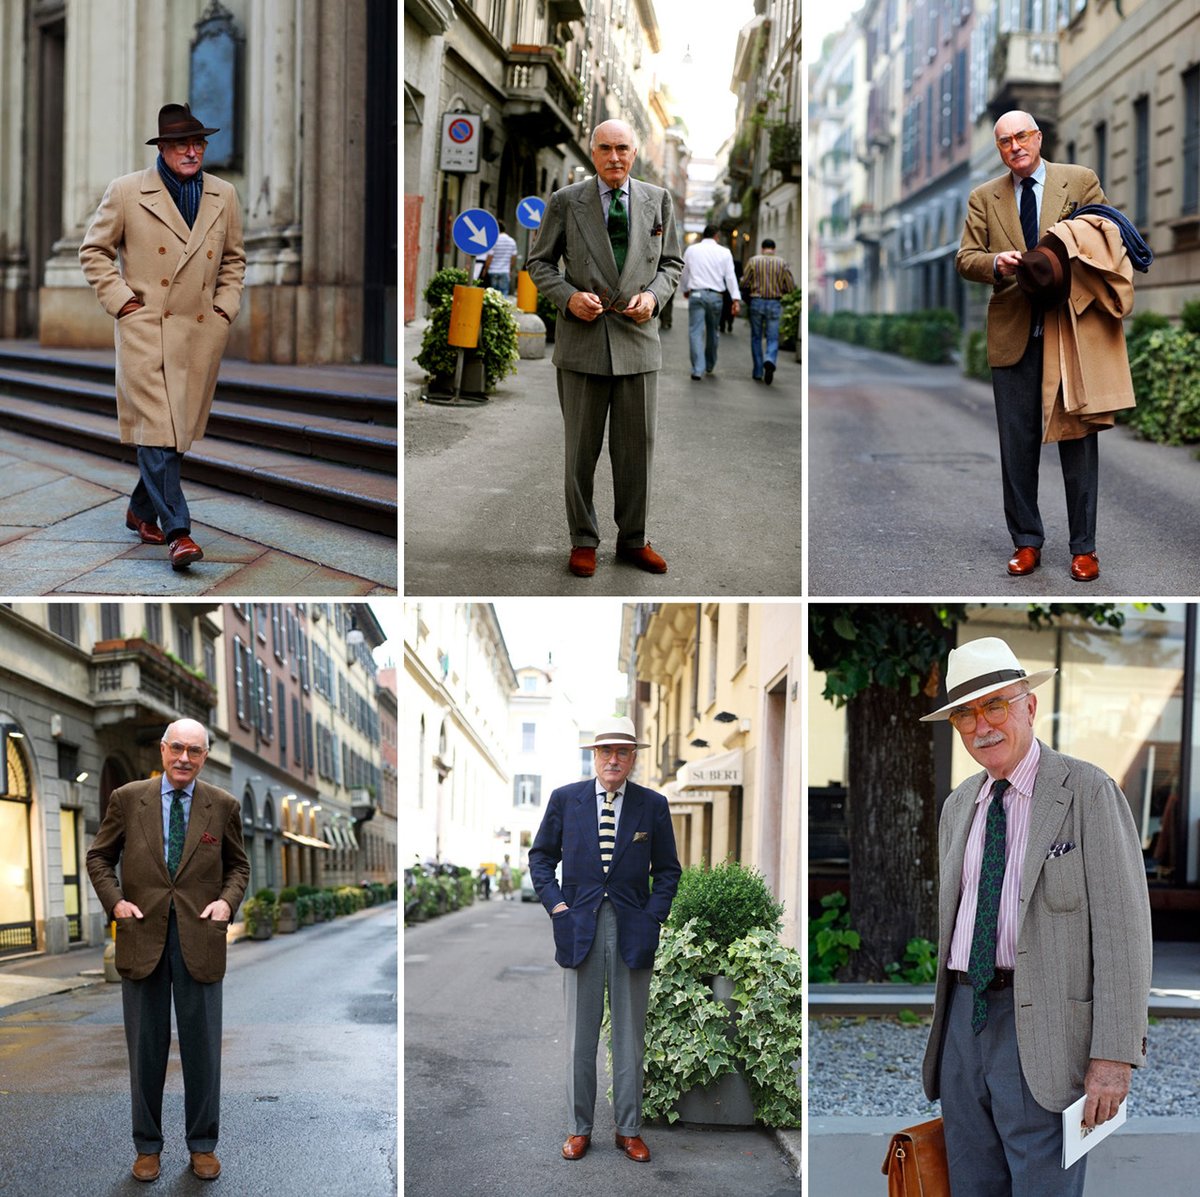 Luciano Barbera appreciation. A man who has always championed a softer shoulder line, a fuller jacket, and trousers that just graze the top of your shoes.